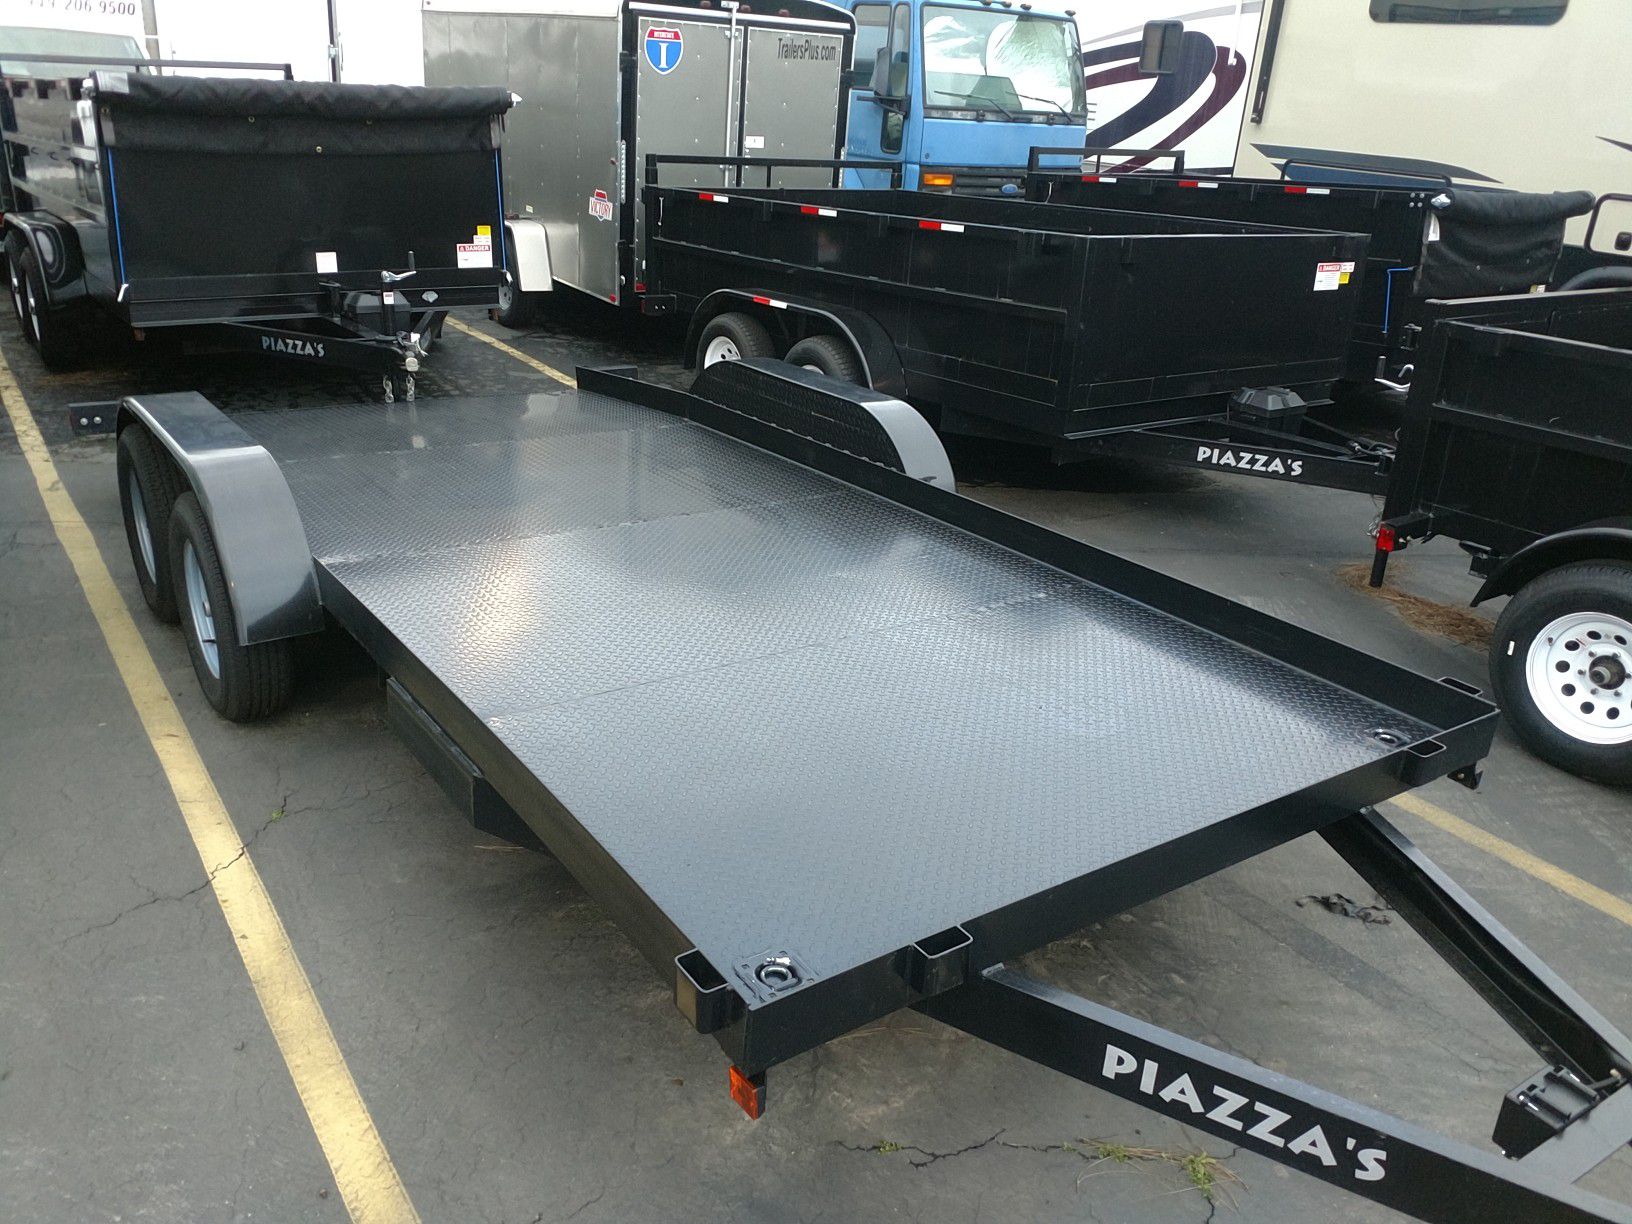 Flatbed car carrier trailer for sale or rent. Great for moving cars, SUVs, side x side RZR, sandrails, motorcycles... 7000# GVWR. Rental is $120/ day.